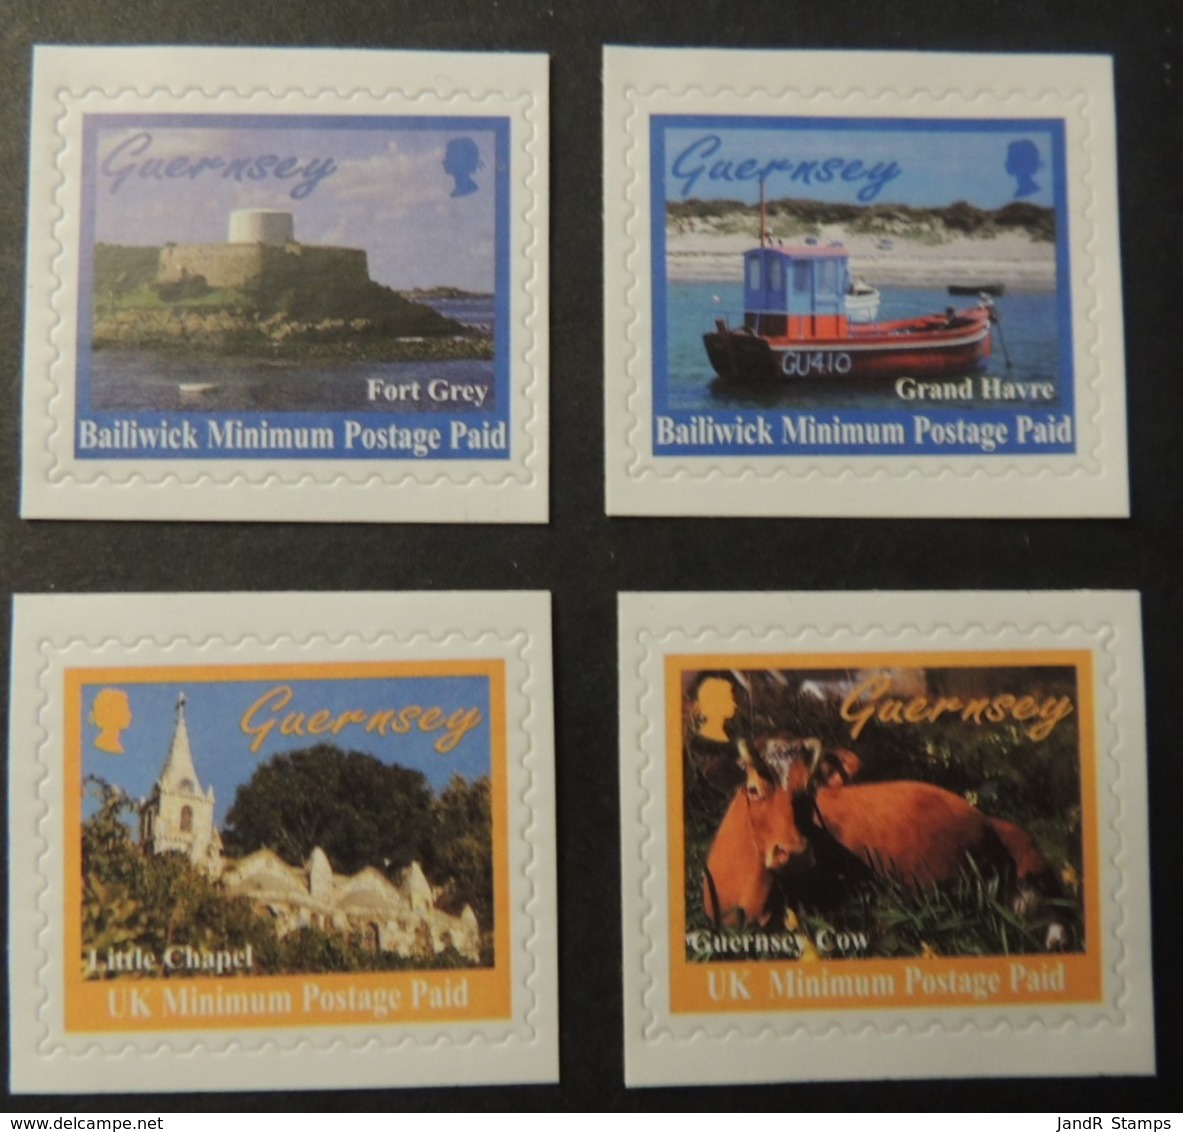 GUERNSEY 1998 SCENES SELF-ADHESIVE SG770-773 MNH 4 VALUES FORT GREY GRTAND HAVRE LITTLE CHAPEL COW BOVINE - Guernesey